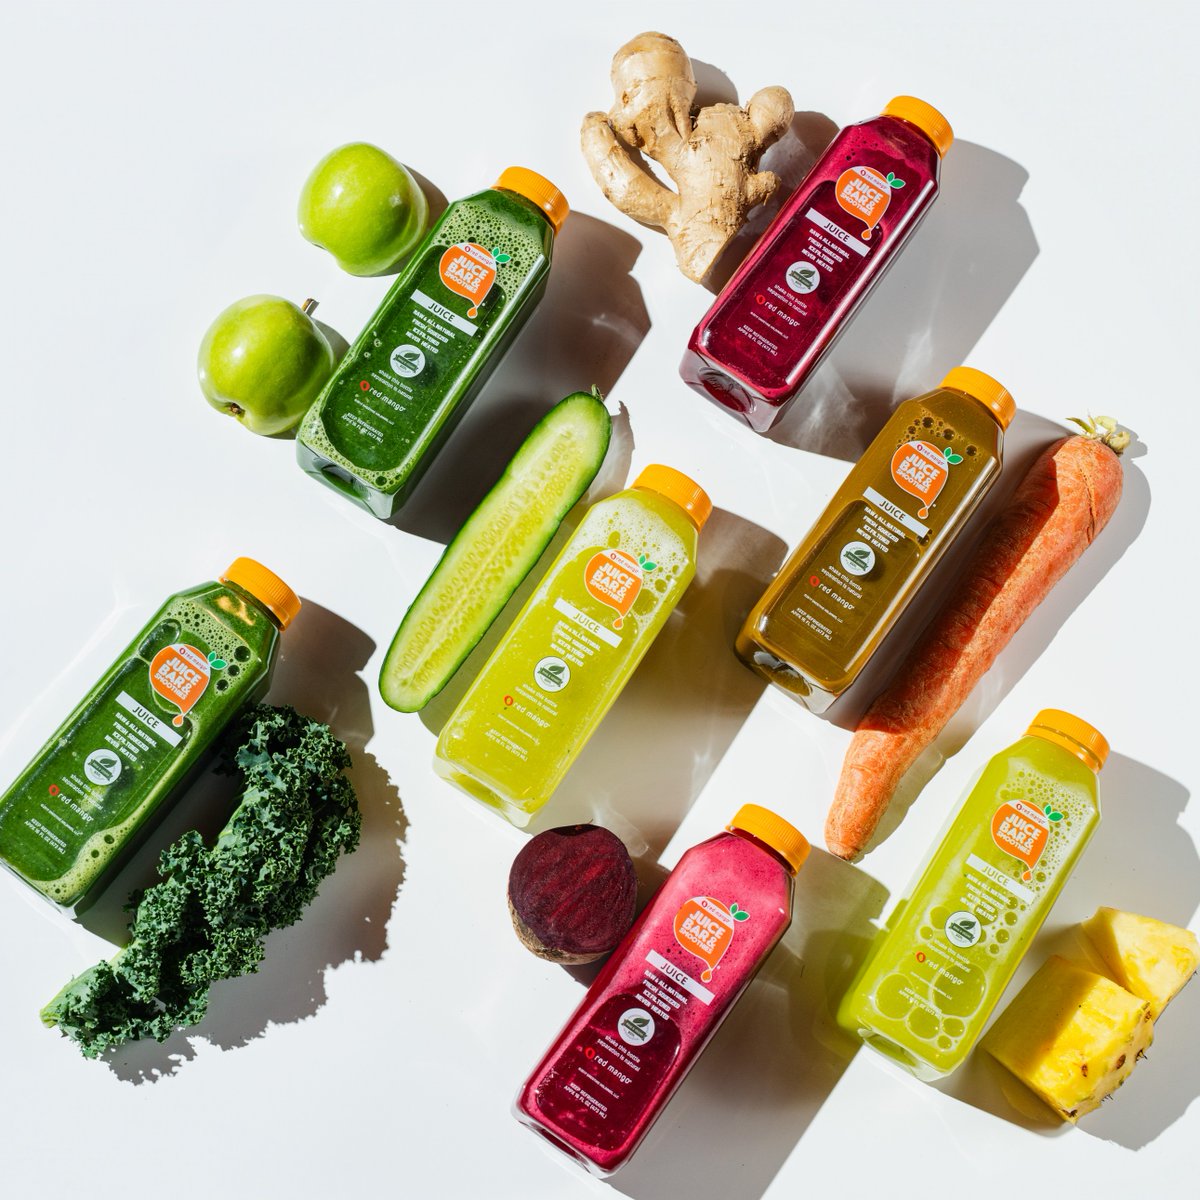 Health hack unlocked 🔓 Order your detox juices today, so they will be ready for a weekend full of wellness Choose your favorite flavors Head on over to the nearest Red Mango to pick up your order We can’t wait to see you ❤️